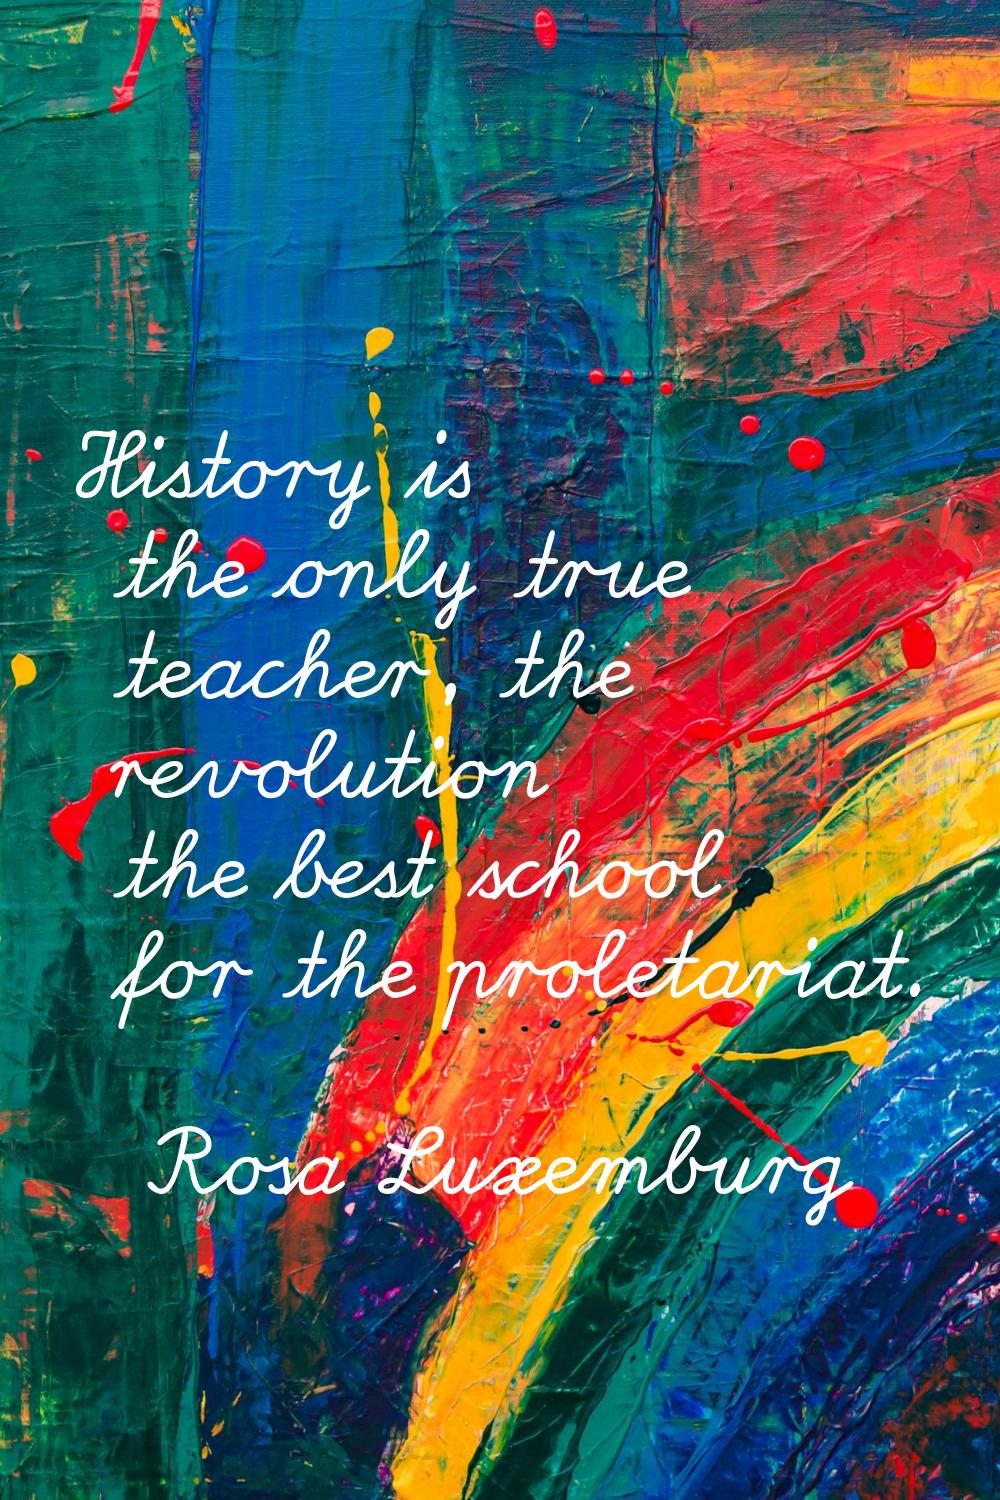 History is the only true teacher, the revolution the best school for the proletariat.